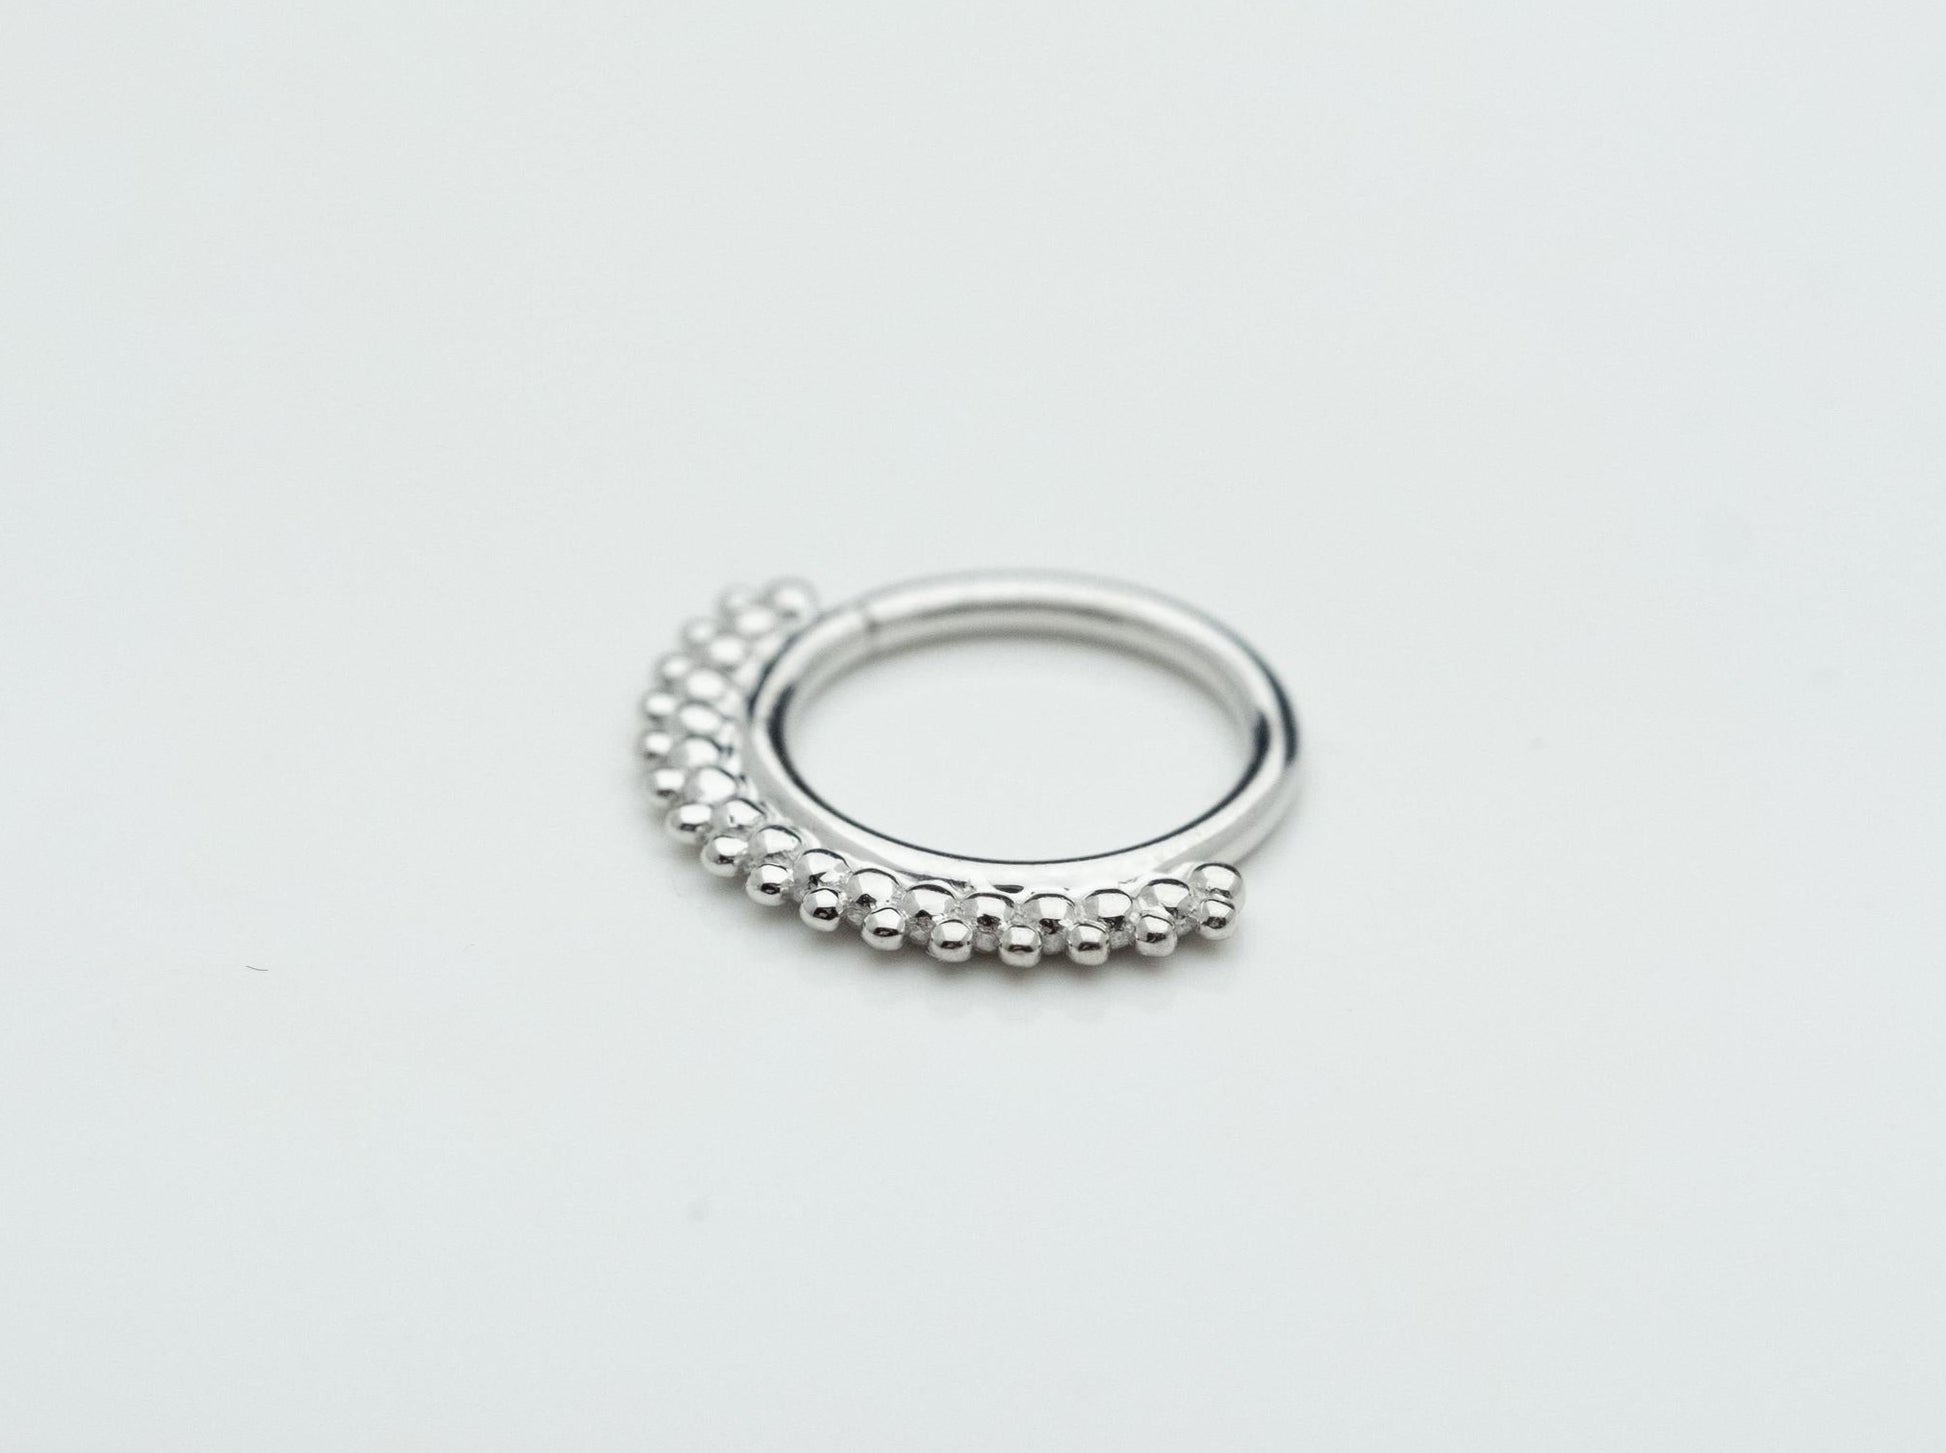 Kolo Seam Ring in 14k White Gold by BVLA